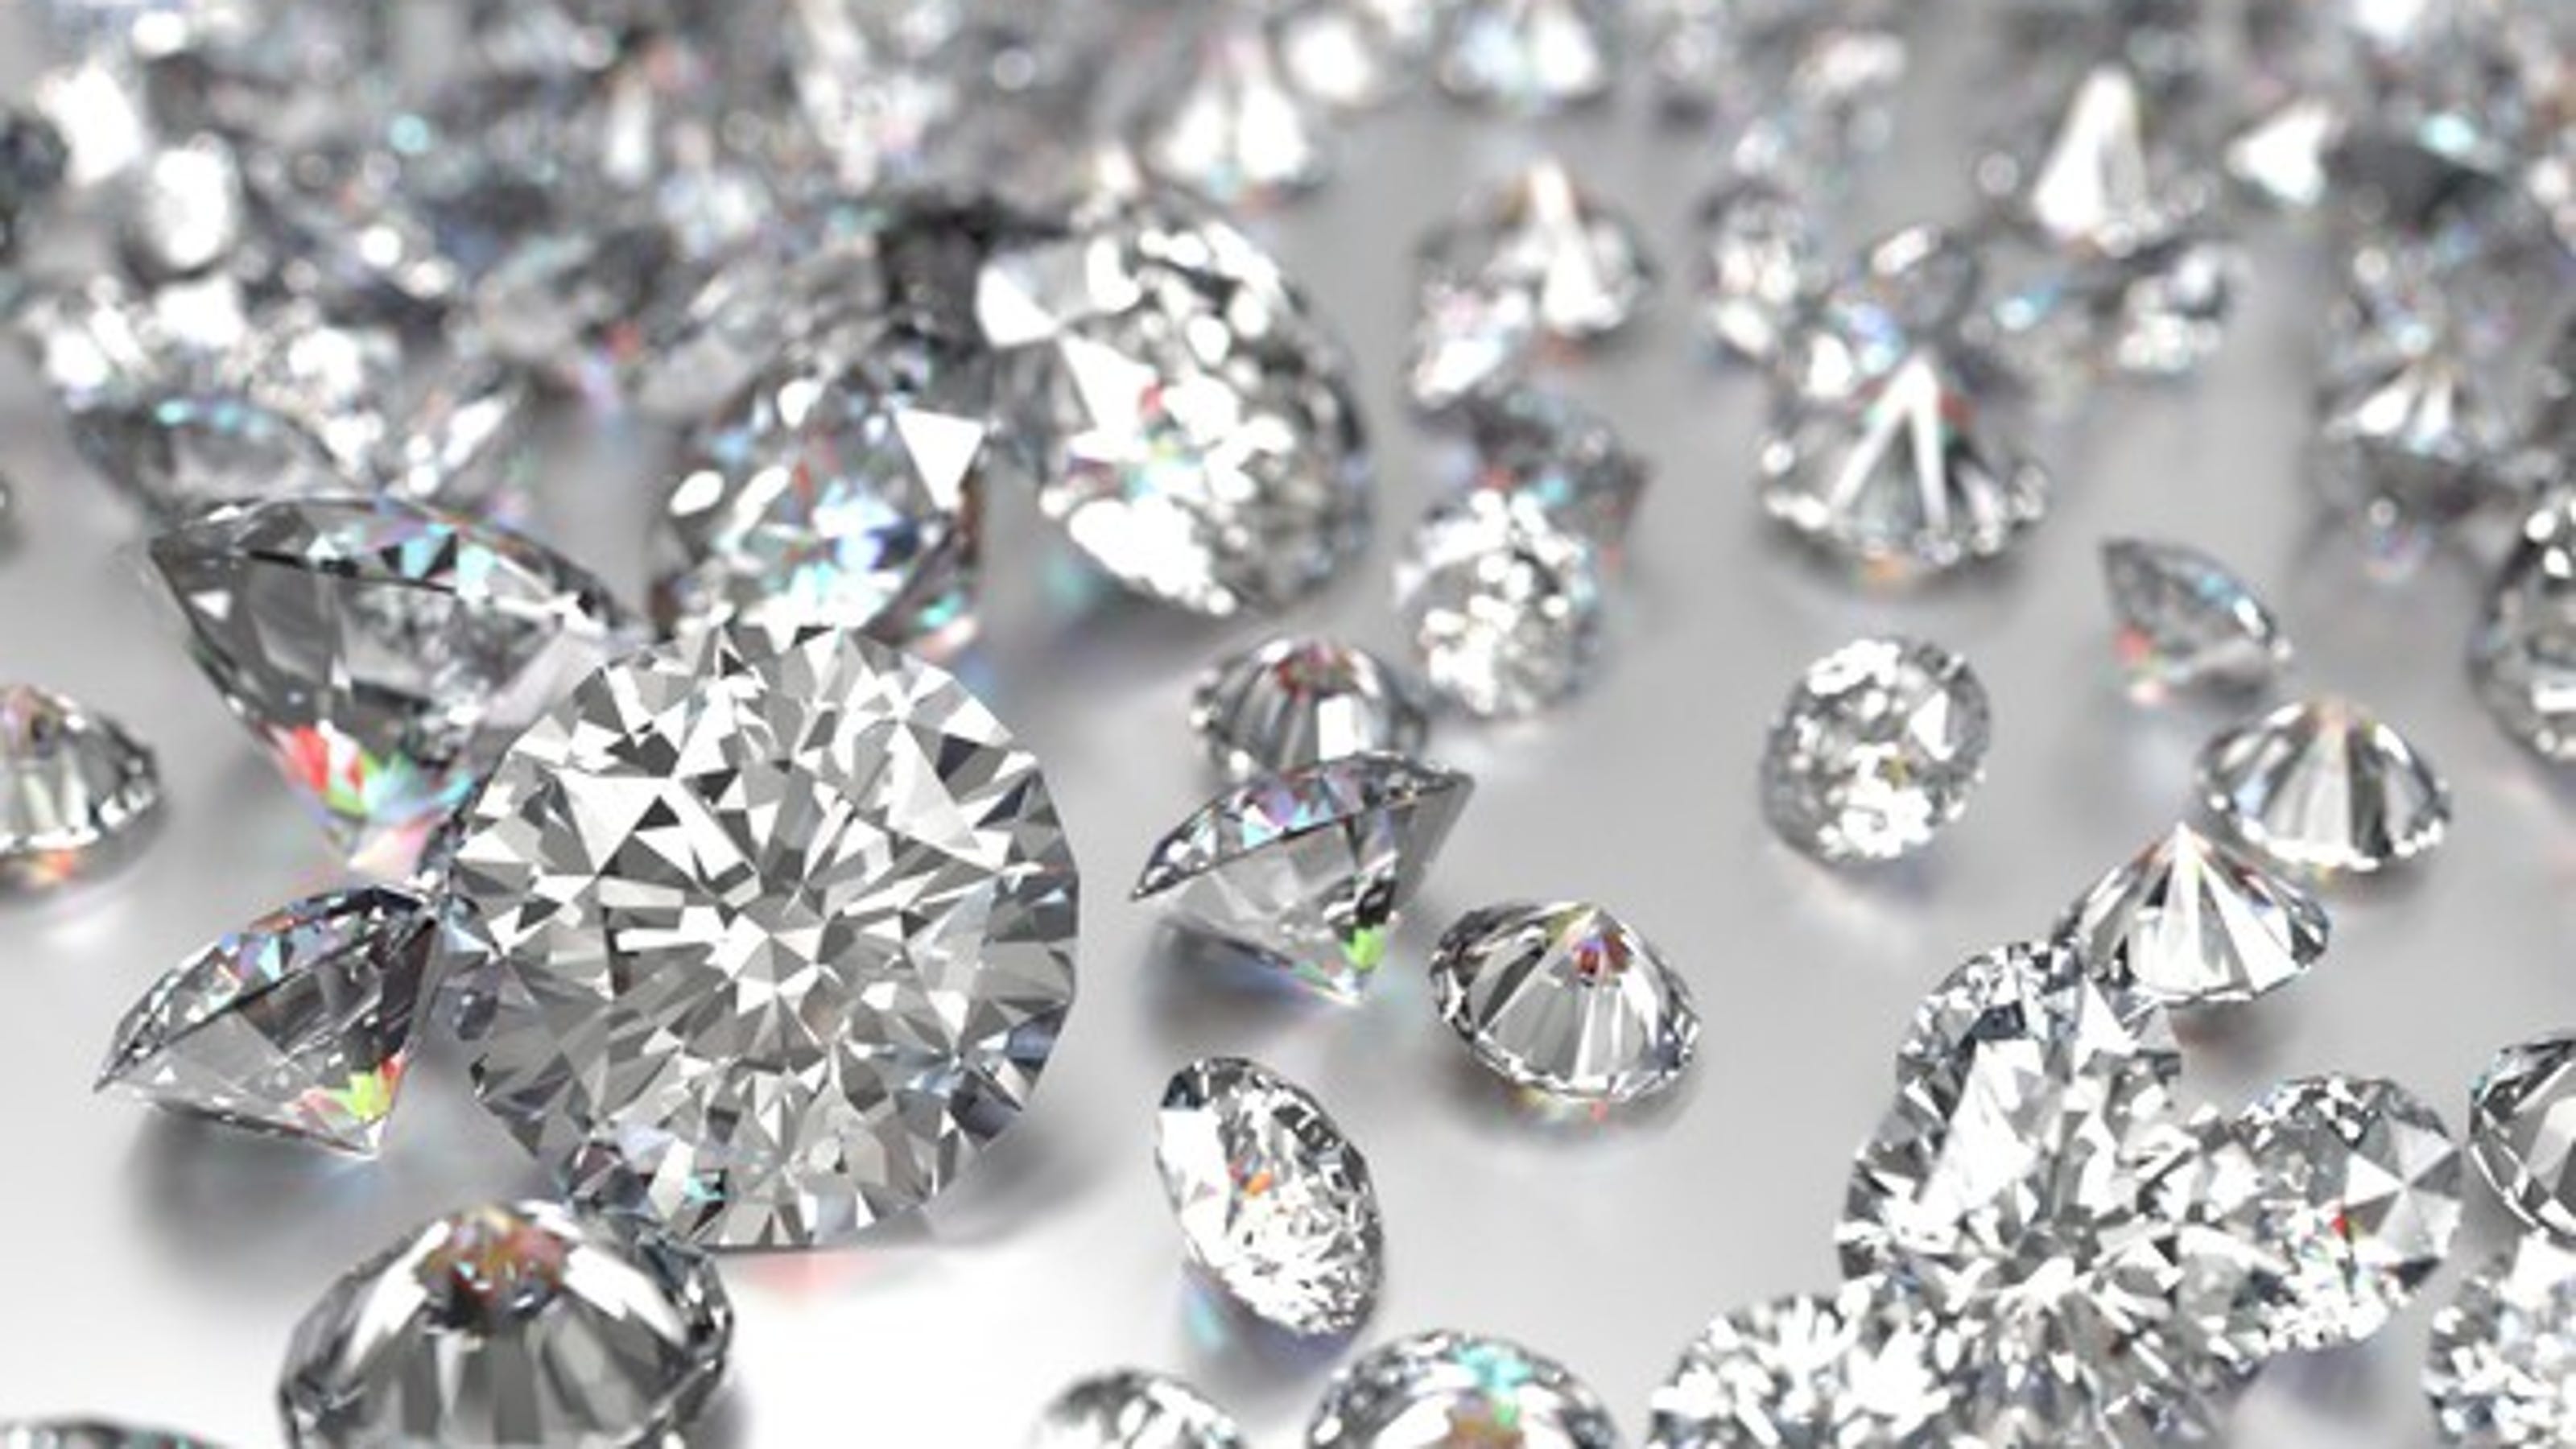 A quadrillion tons of diamonds are hiding below Earth’s surface